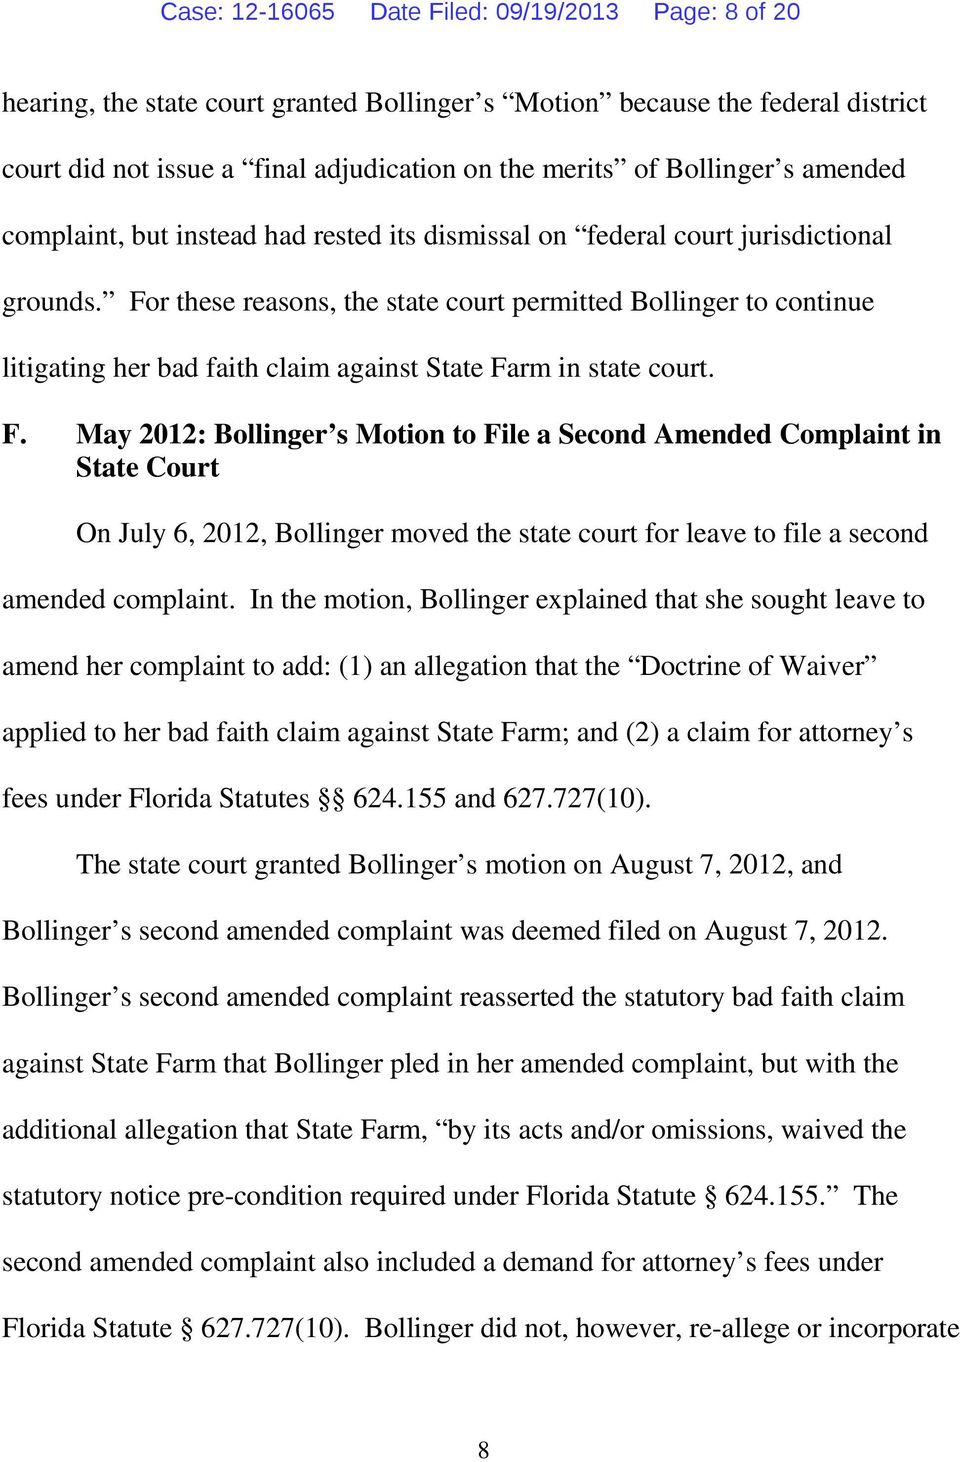 For these reasons, the state court permitted Bollinger to continue litigating her bad faith claim against State Fa